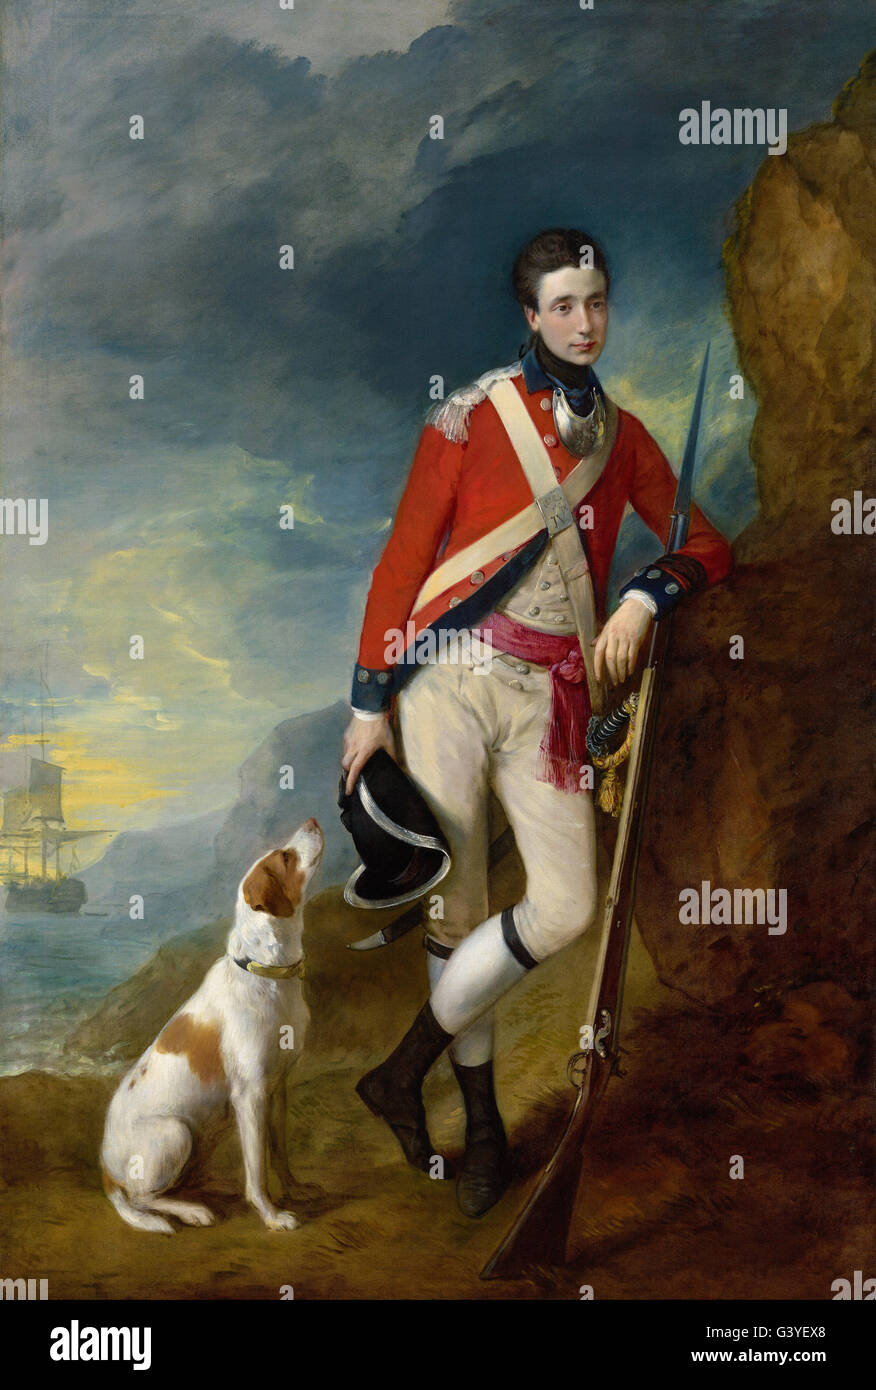 Thomas Gainsborough - An officer of the 4th Regiment of Foot Stock Photo